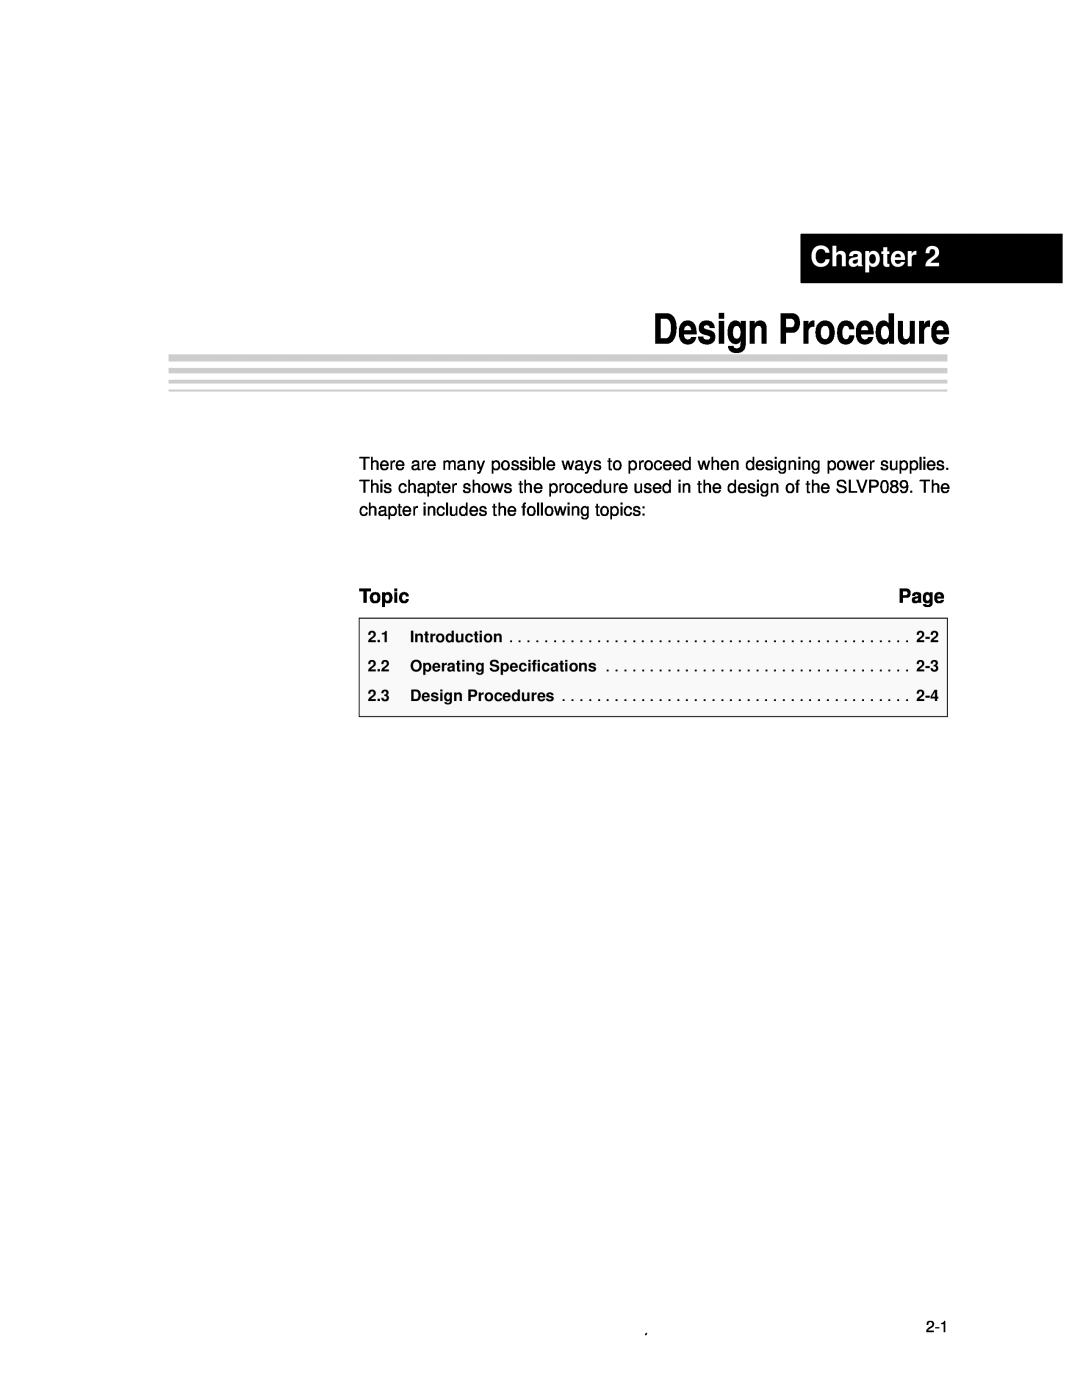 Texas Instruments SLVP089 manual Design Procedure, Chapter, Page, Topic 